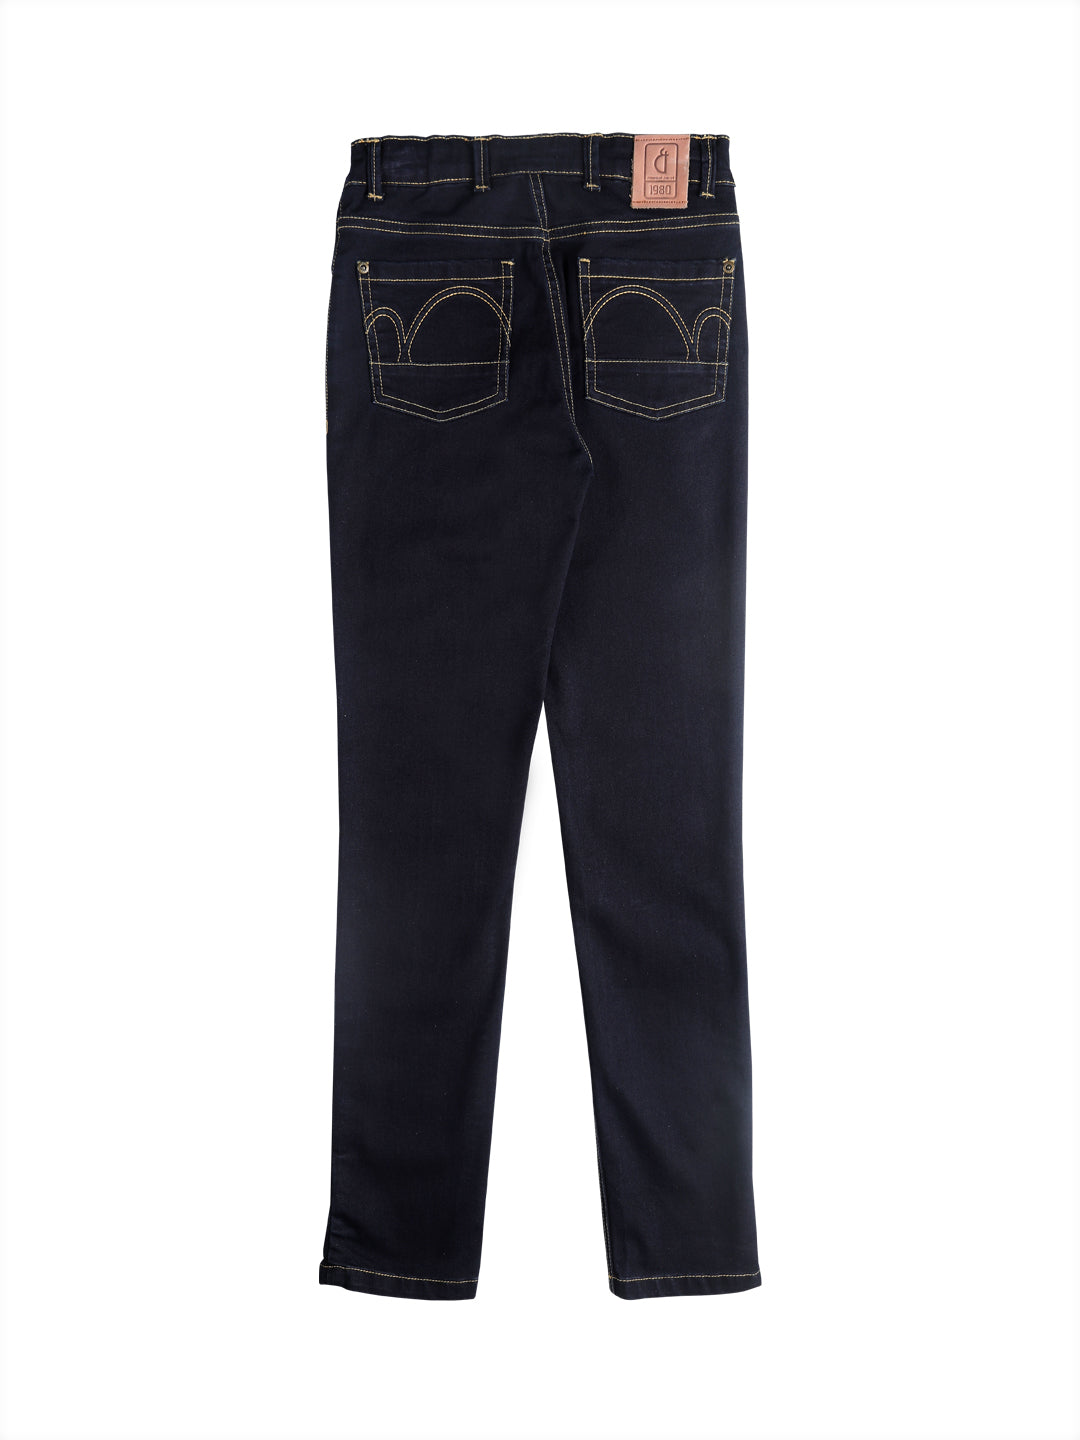 Boys Black Cotton Solid Fixed Waist Jeans